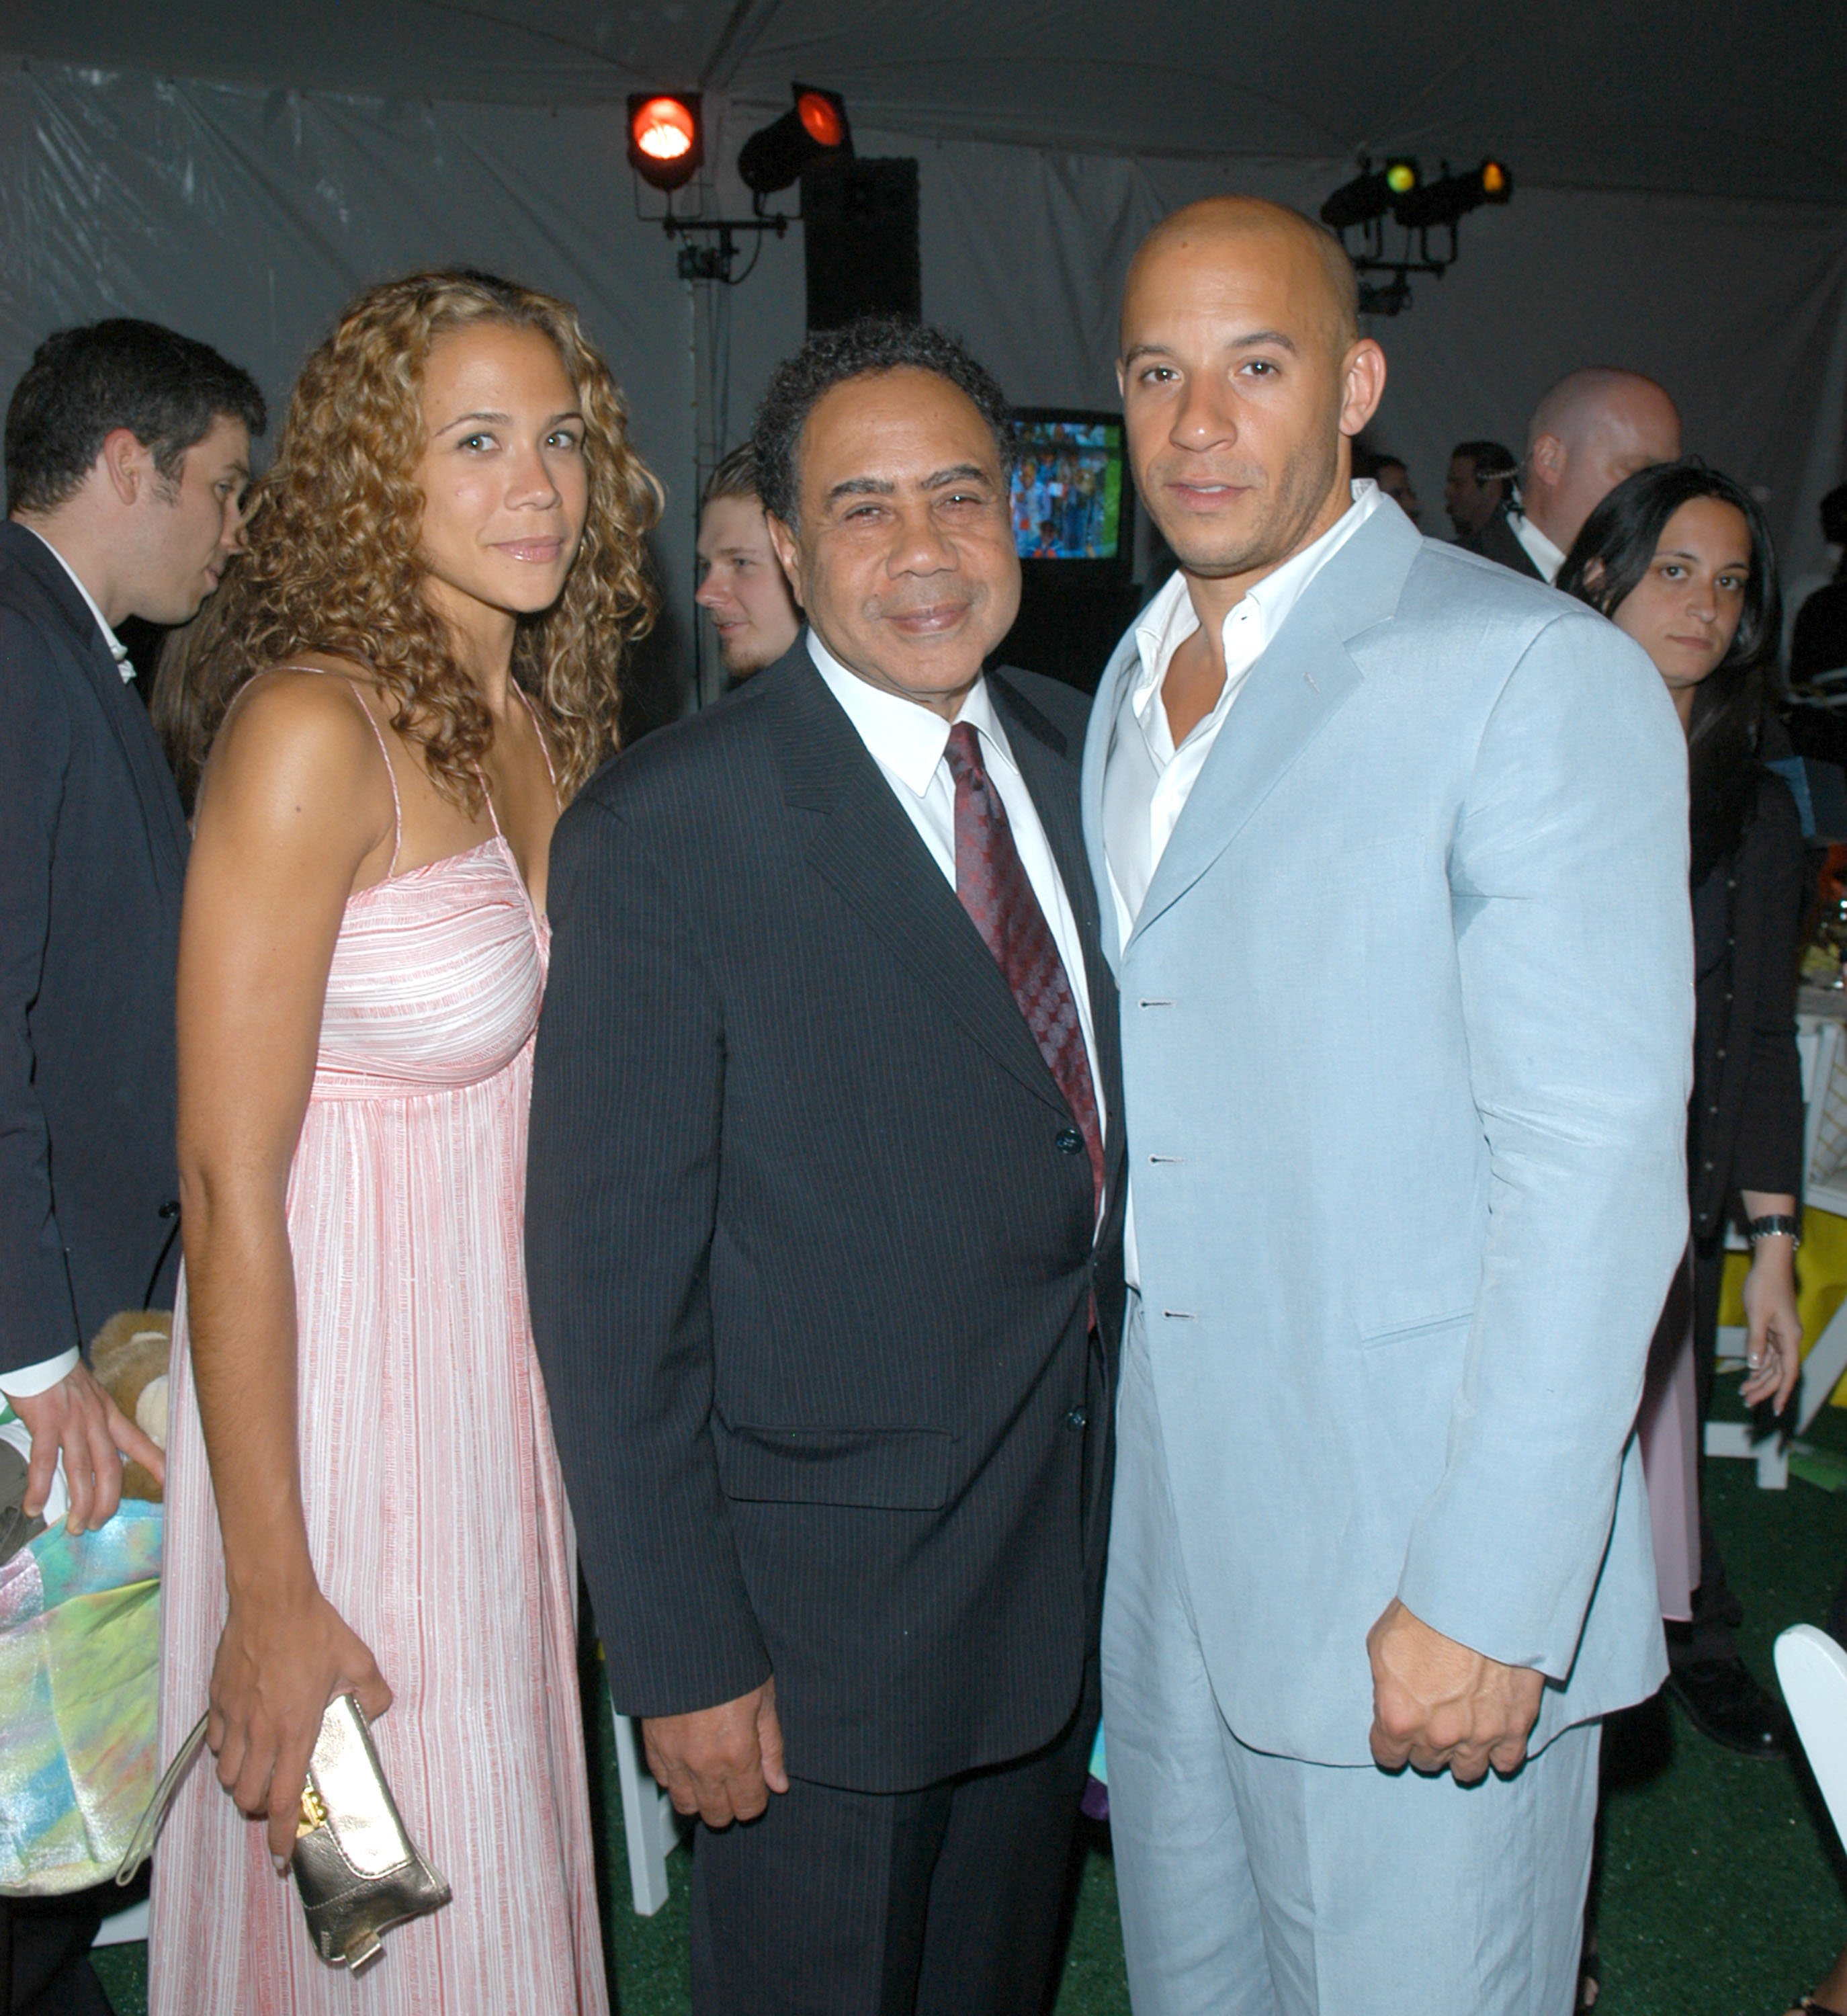 Vin Diesel with his sister and father, Irving Vincent, during the "Build-A-Bear Workshop" at Fresh Air Fund Spring Gala in New York City, on June 2, 2005. | Source: Getty Images